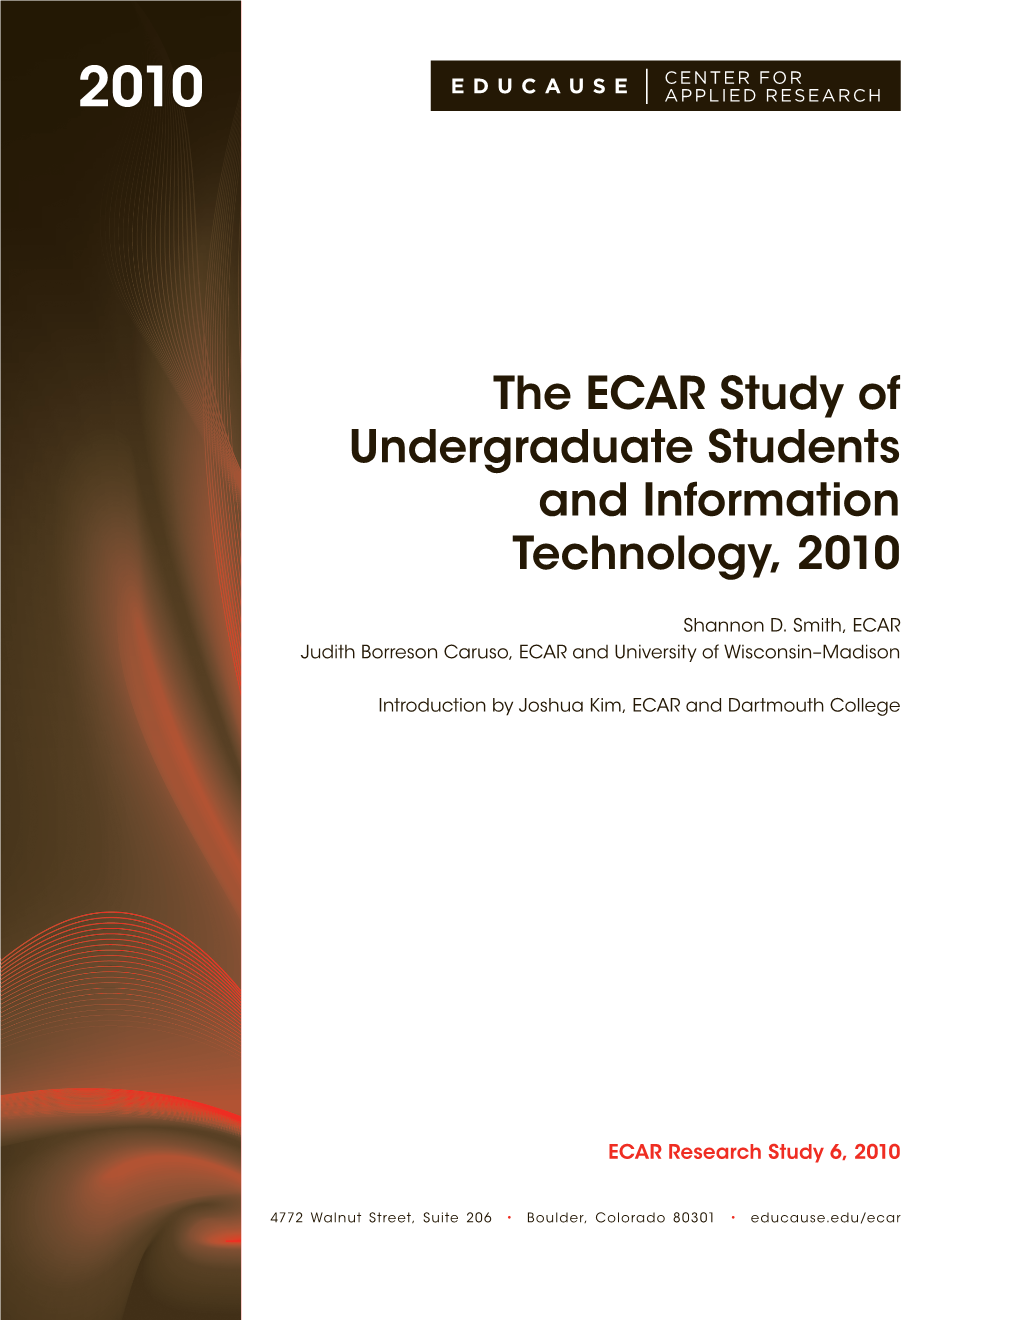 The ECAR Study of Undergraduate Students and Information Technology, 2010